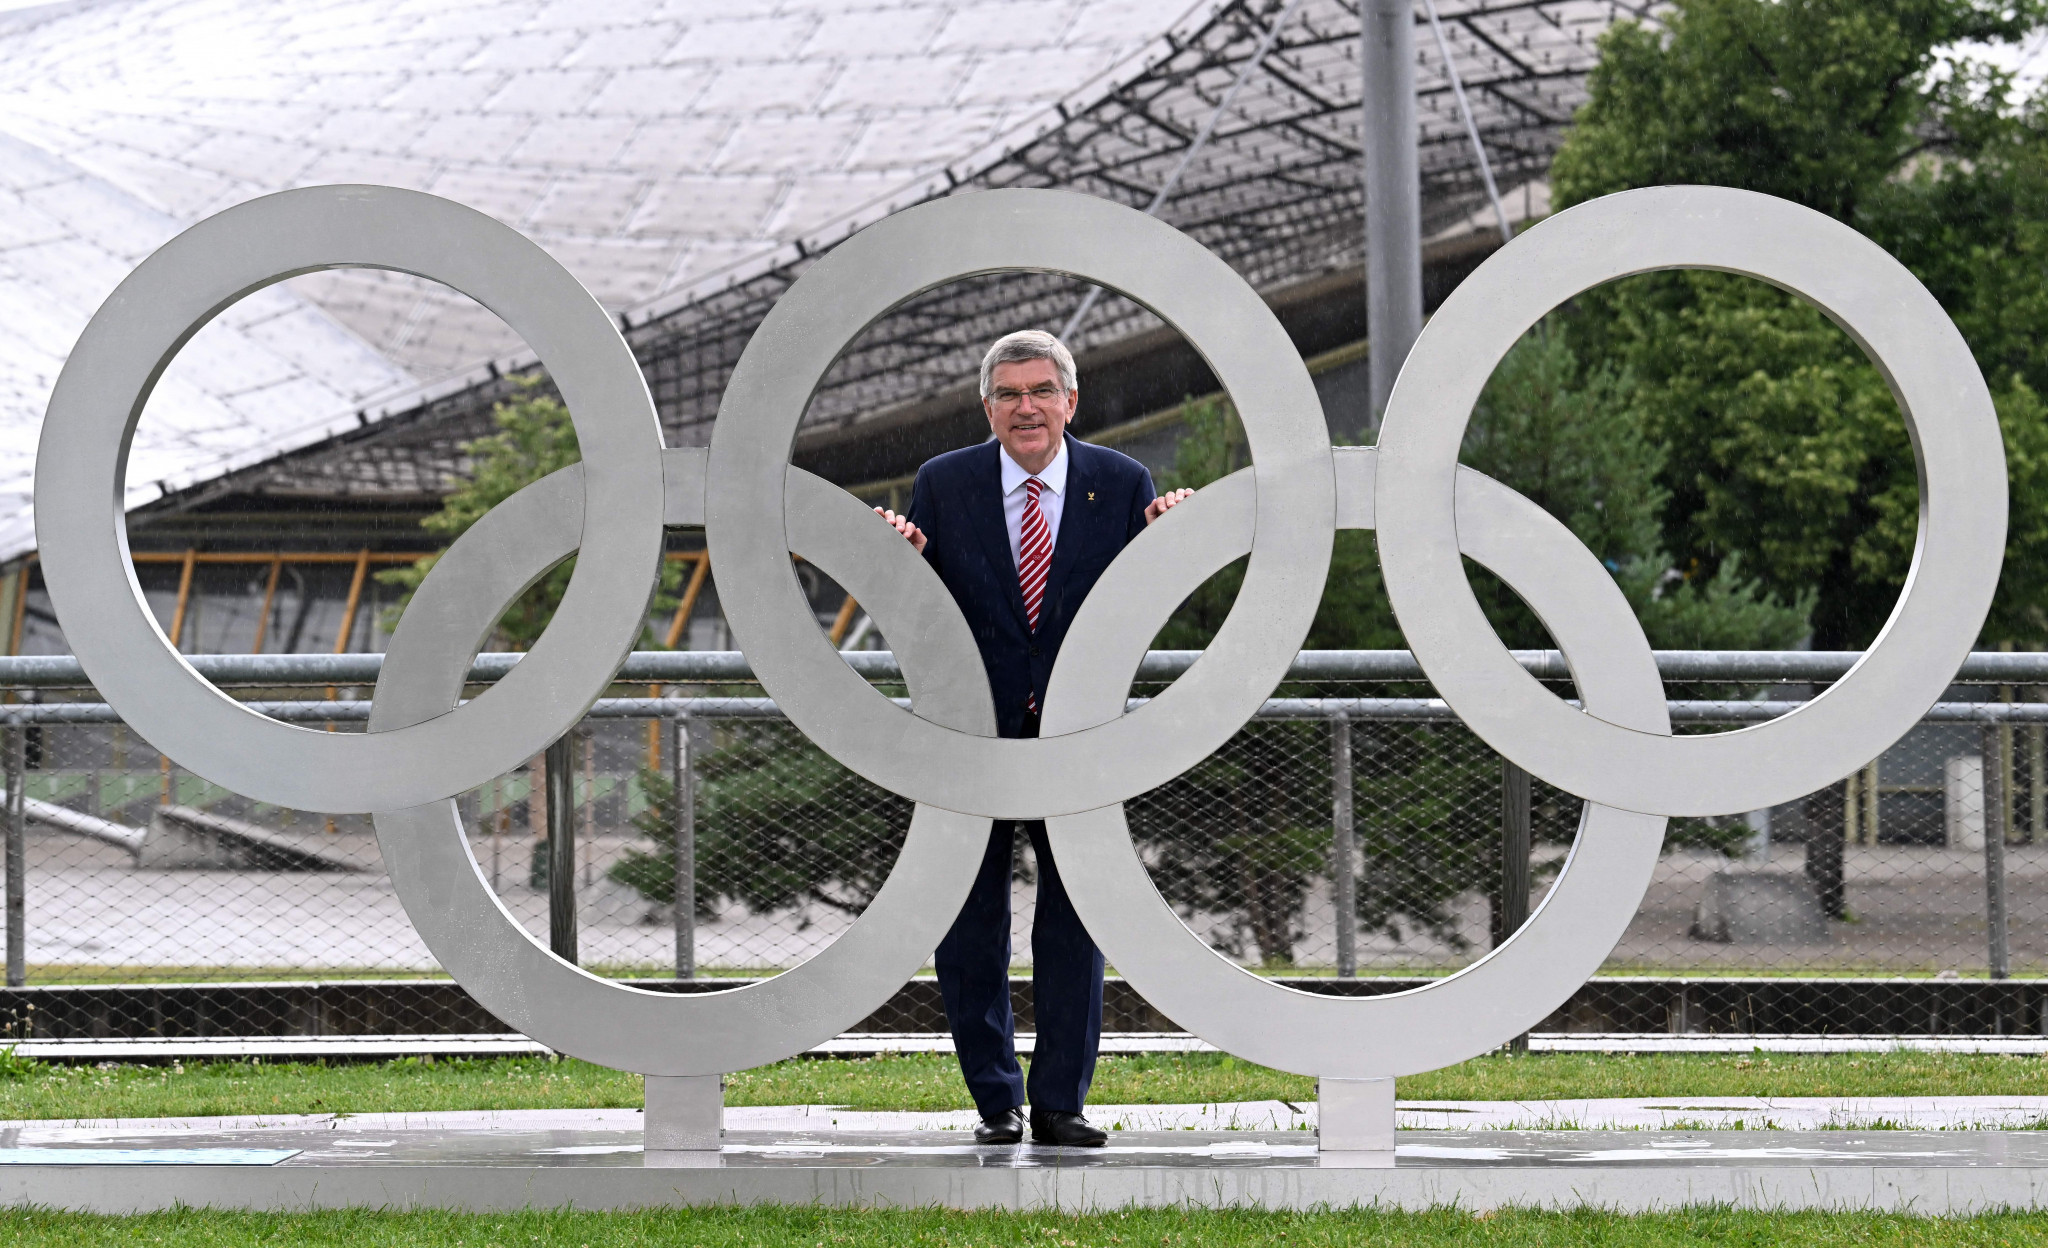 IOC President Thomas Bach helped unveil Olympic rings to commemorate 50 years since the Munich Olympics ©Getty Images